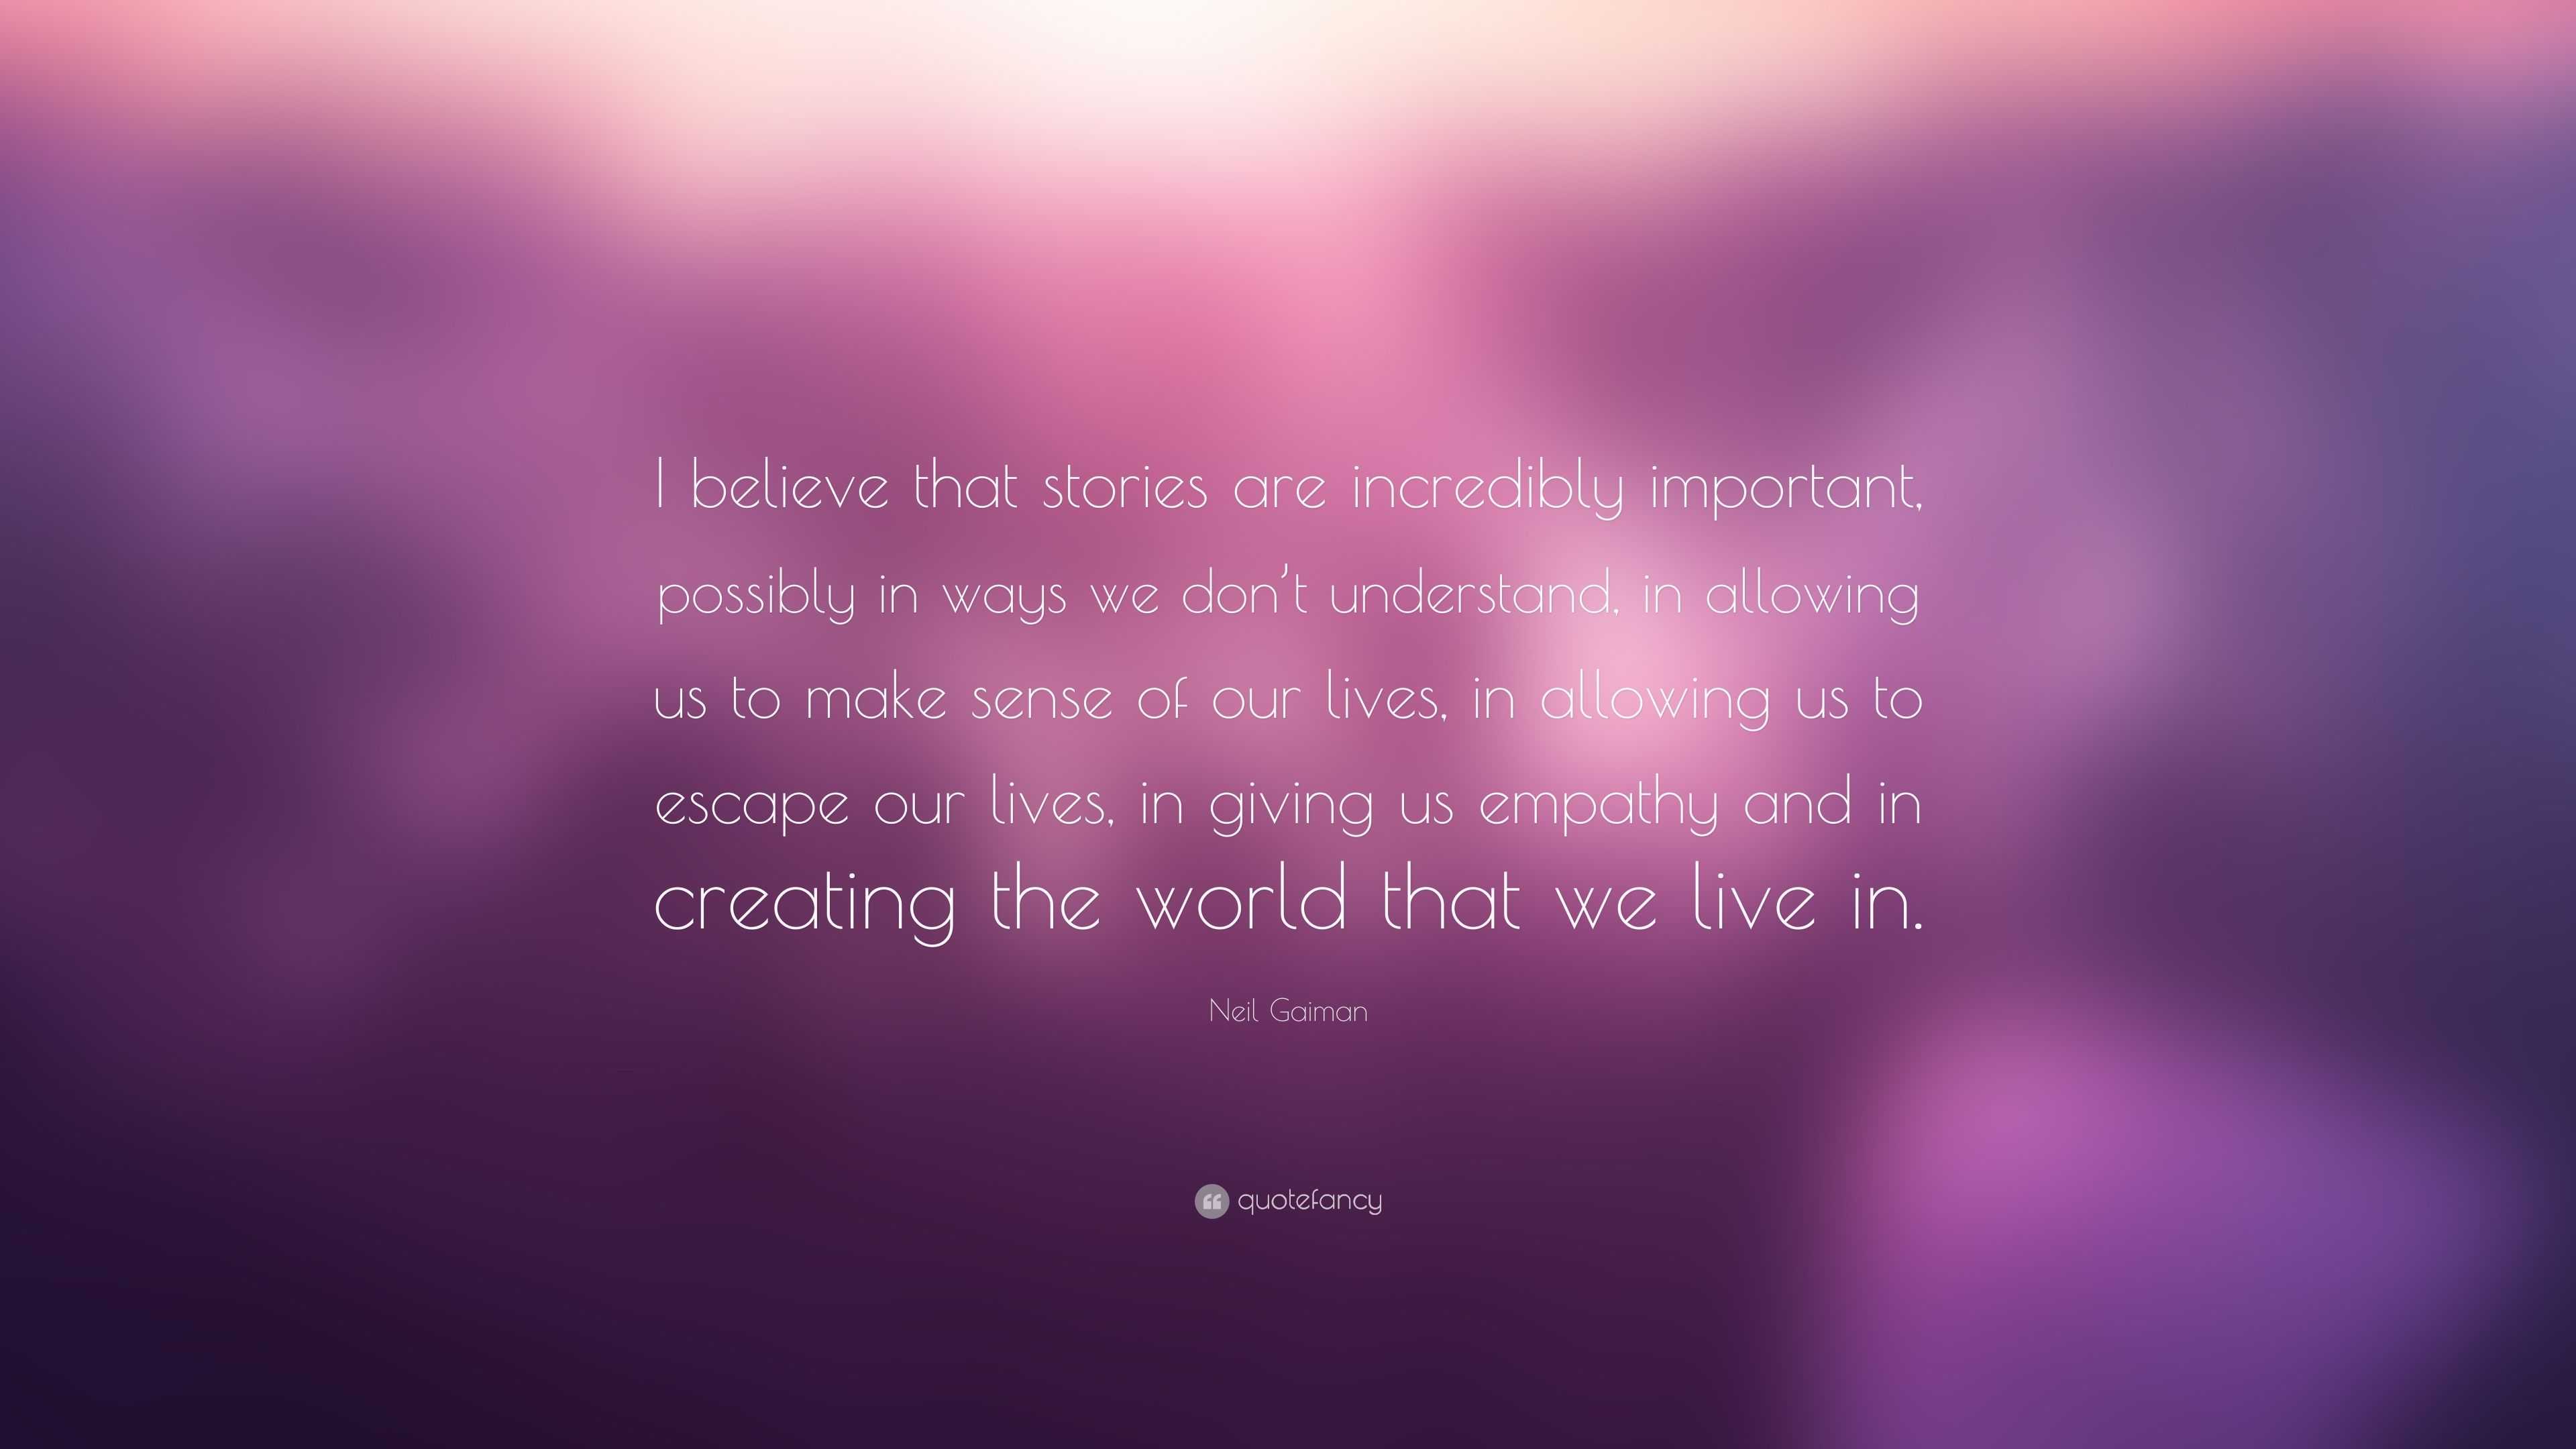 Neil Gaiman Quote: “I believe that stories are incredibly important ...